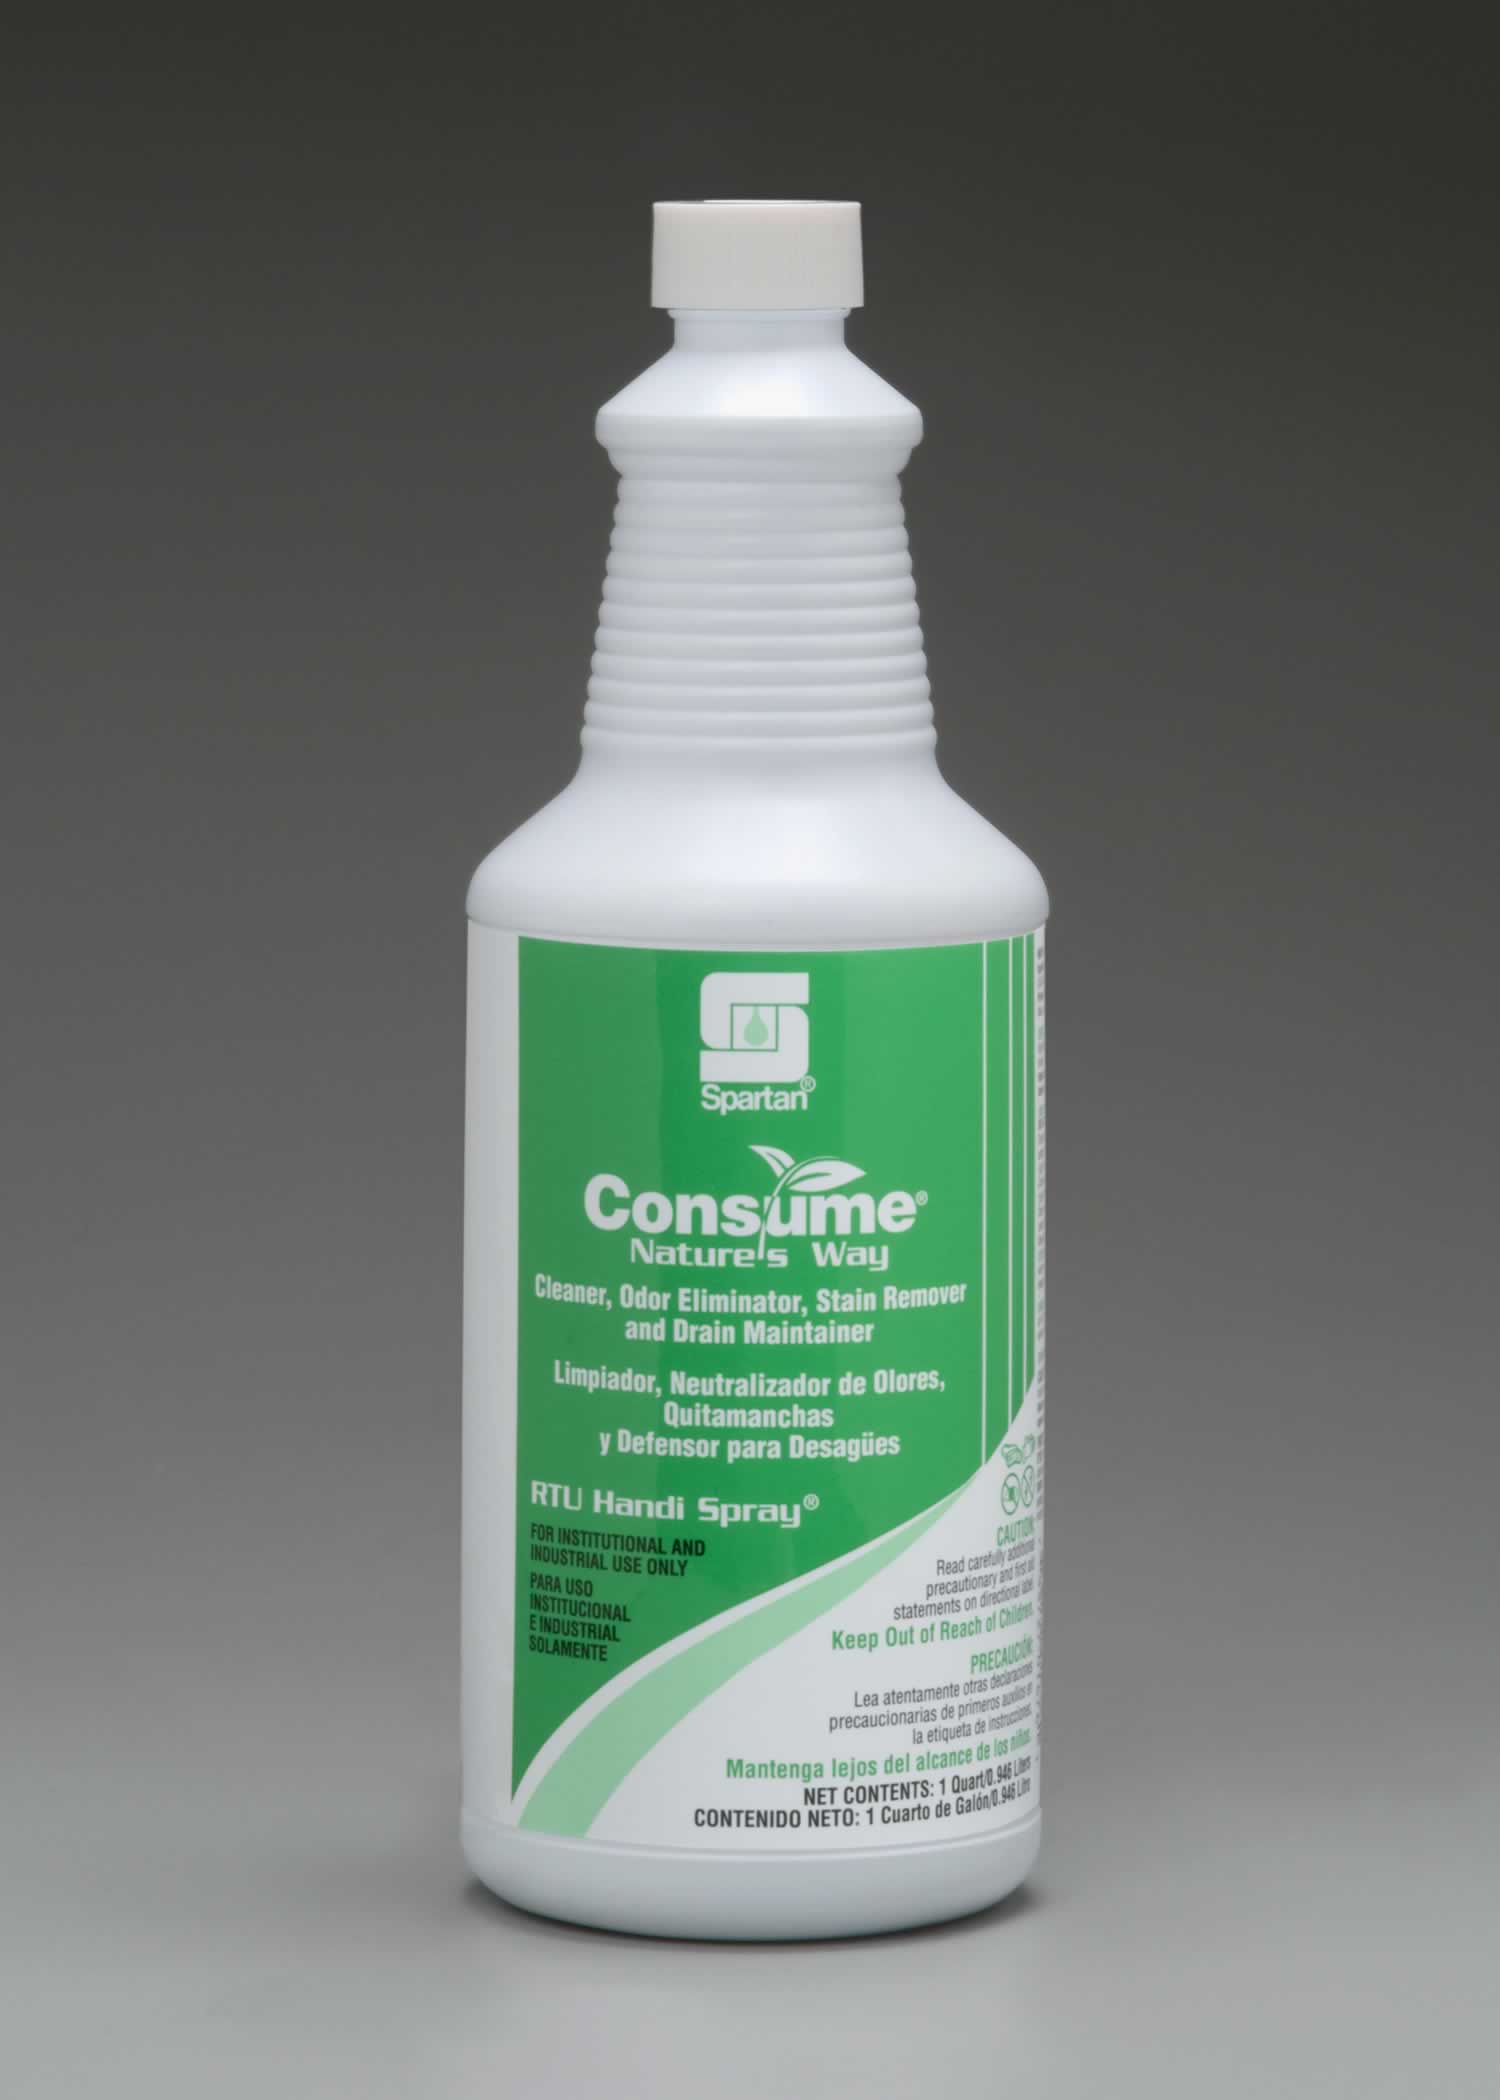 Consume cleaner, odor eliminator, stain remover, and drain maintainer for eliminating odors